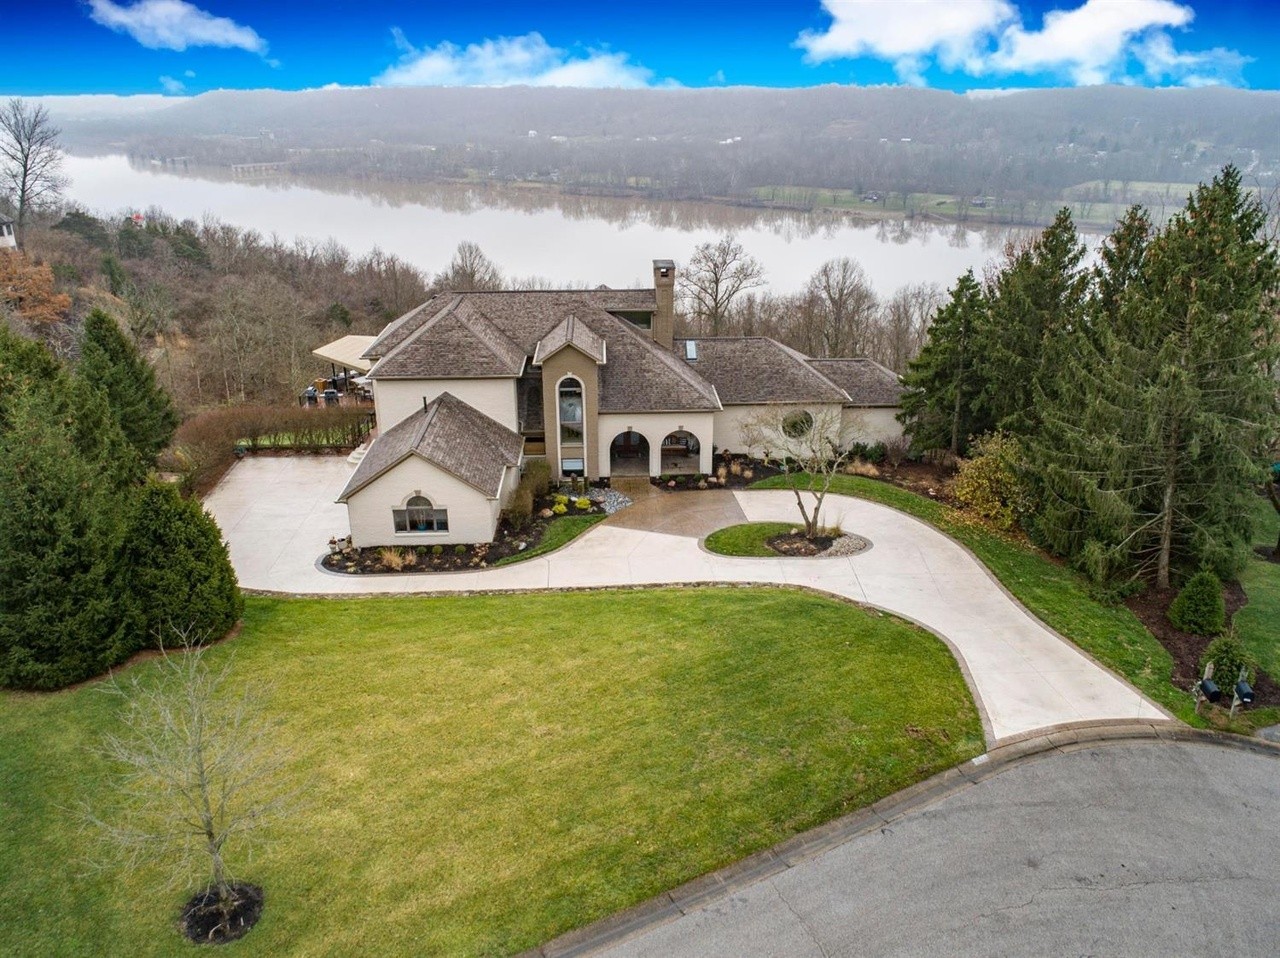 This Anderson Home with Beautiful Views of the Ohio River Is for Sale for $2.1 Million